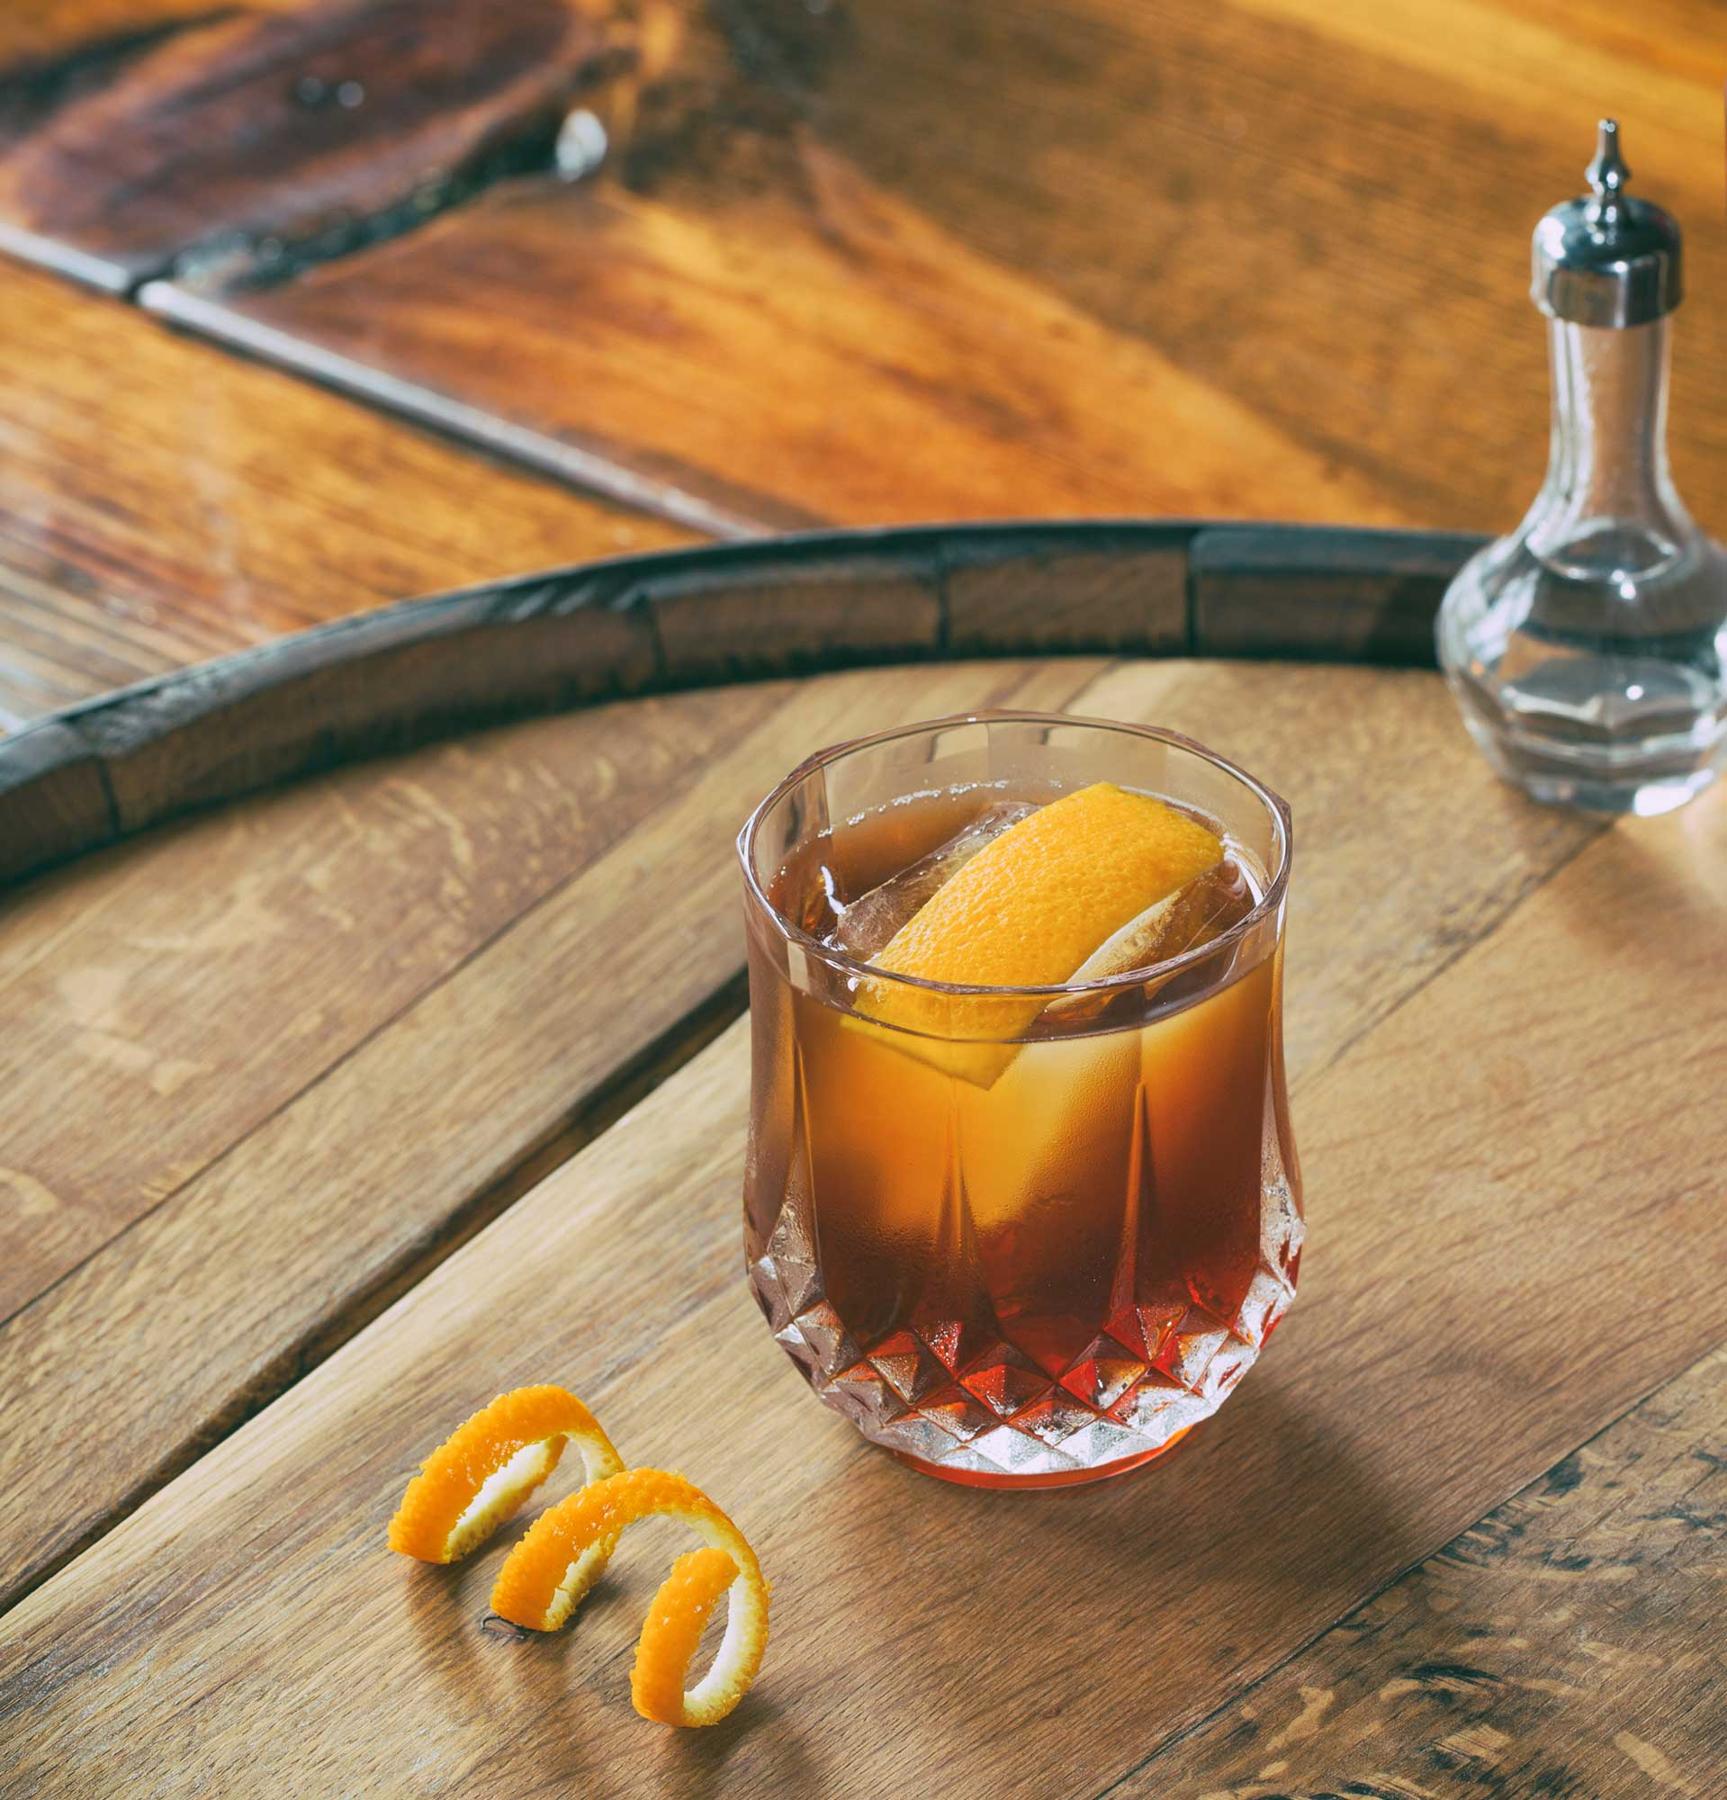 An example of the The Niall, the mixed drink (drink), by Ryan Maybee, Manifesto and The Rieger, Kansas City, featuring J. Rieger & Co. Kansas City Whiskey, Cocchi Vermouth di Torino ‘Storico’, Aperitivo Cappelletti, Regans’ No. 6 Orange Bitters, Kubler Absinthe Supérieure, large ice cube, and grated orange peel; photo by Brandon Cummins